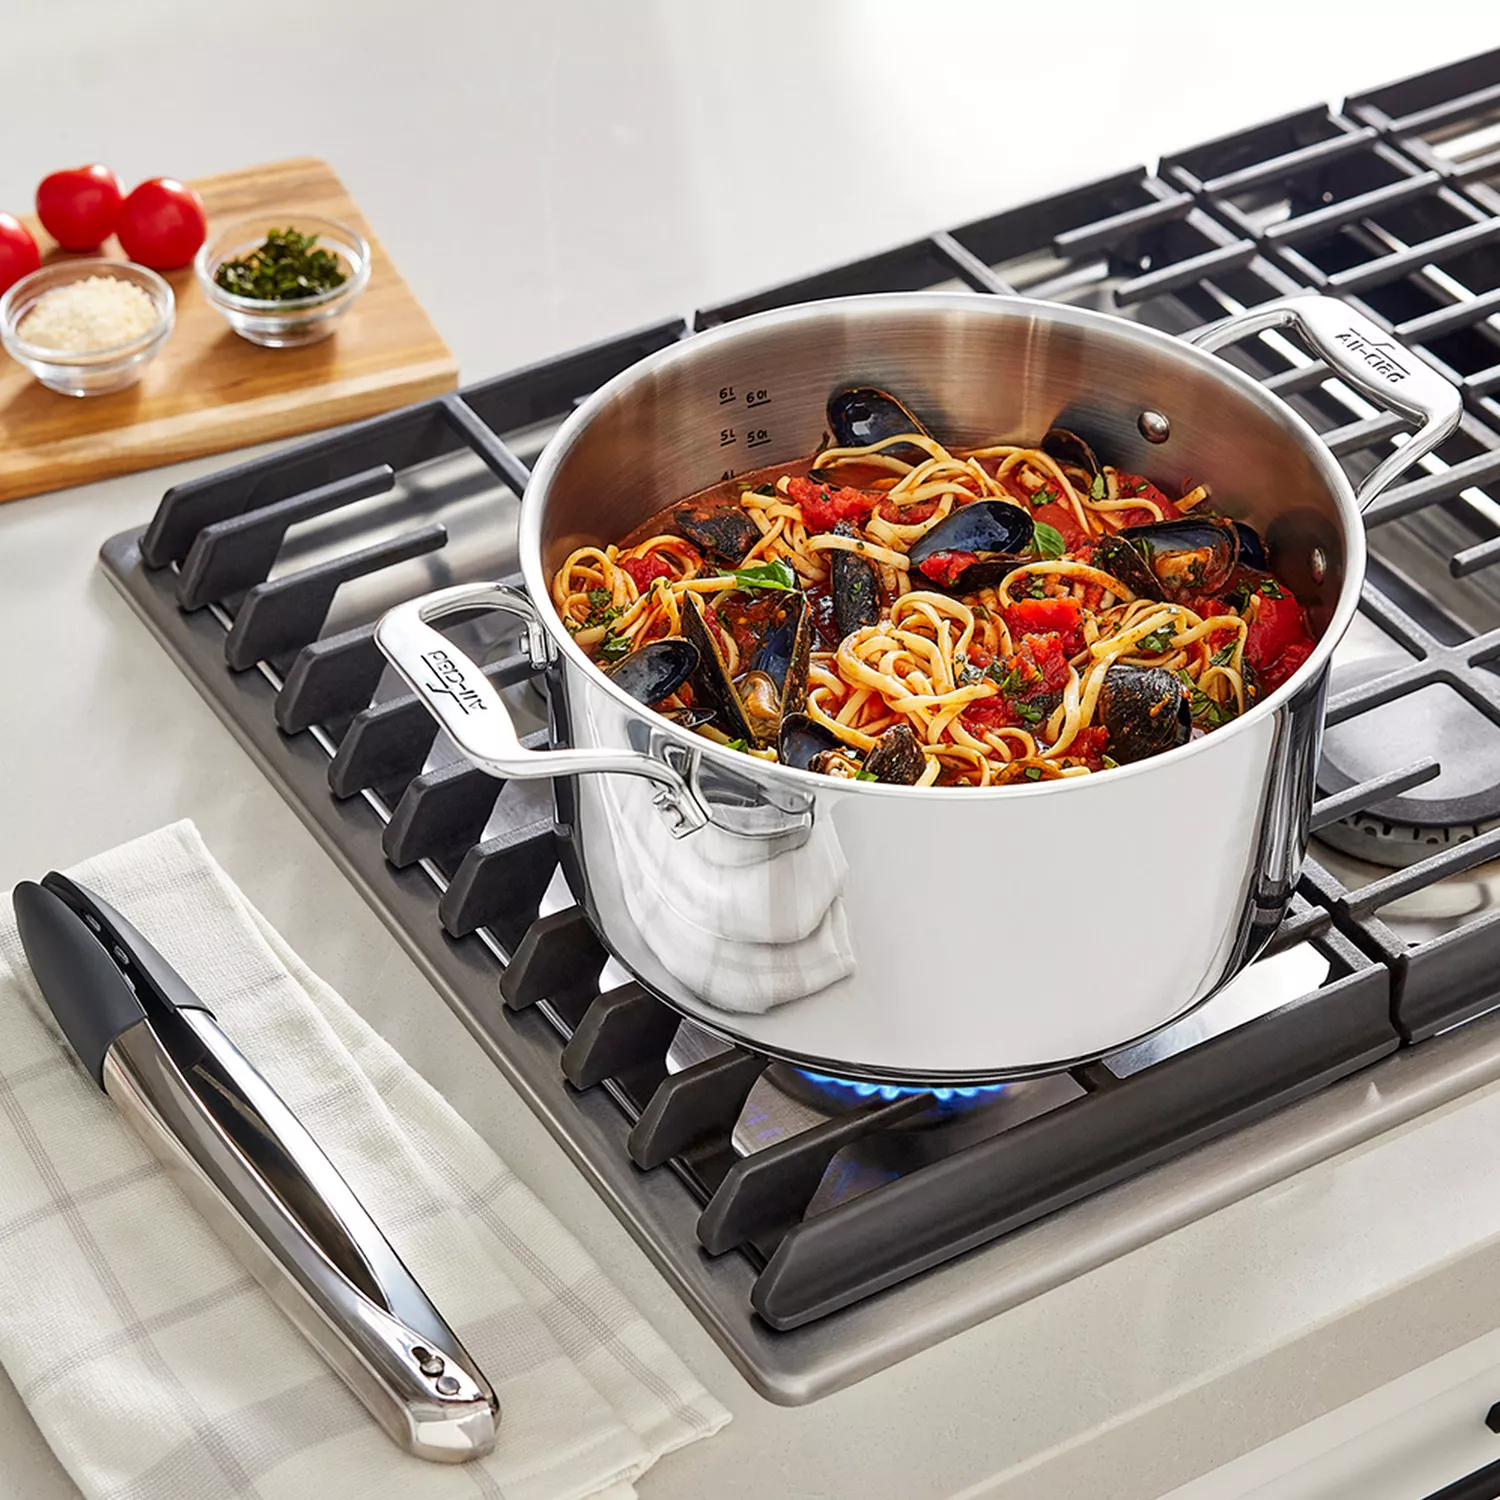 All-Clad Stainless Steel Multi-Pot